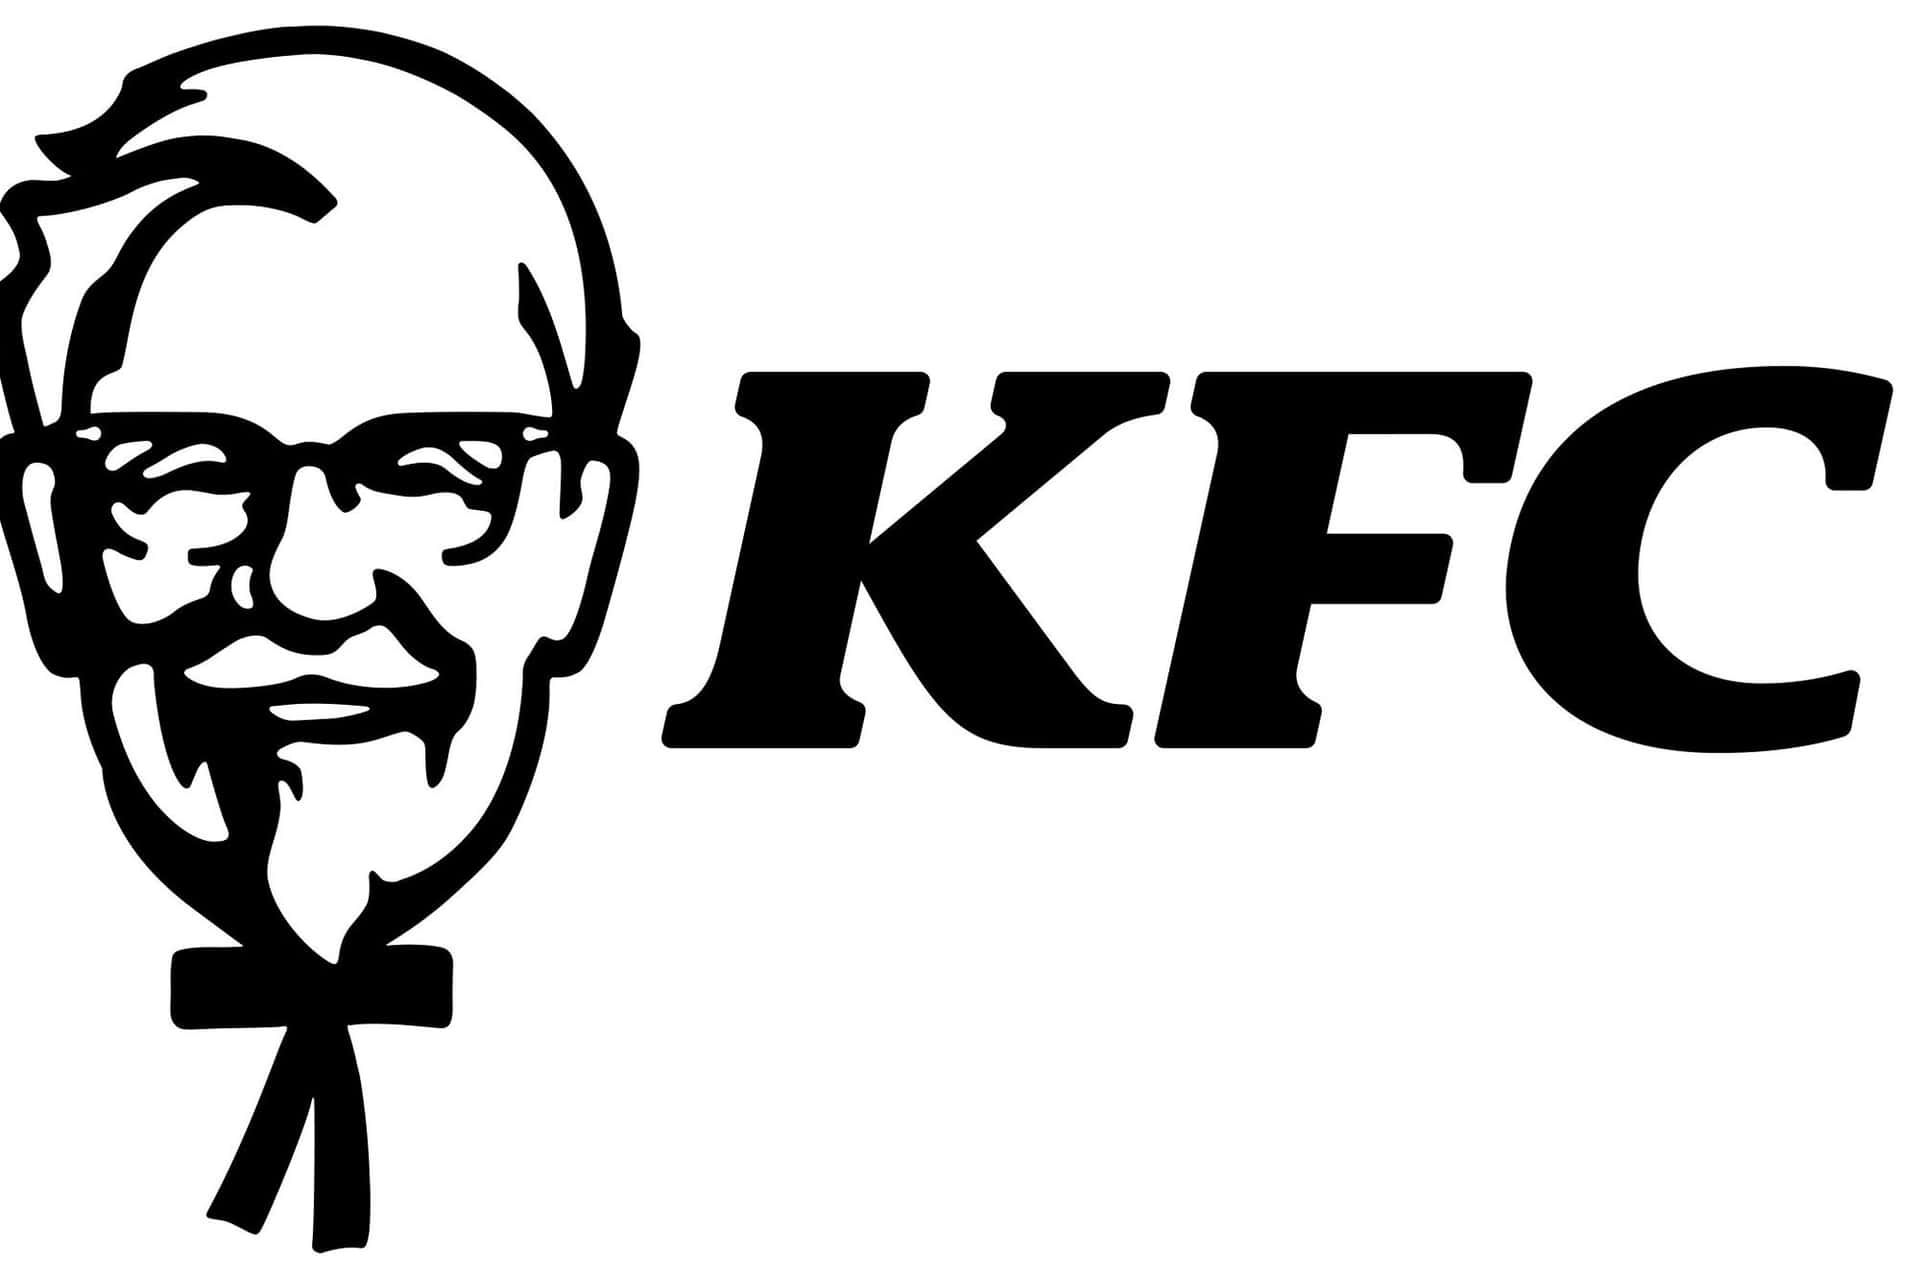 KFC's 11 Herbs and Spices: The Secret Behind the Famous Taste